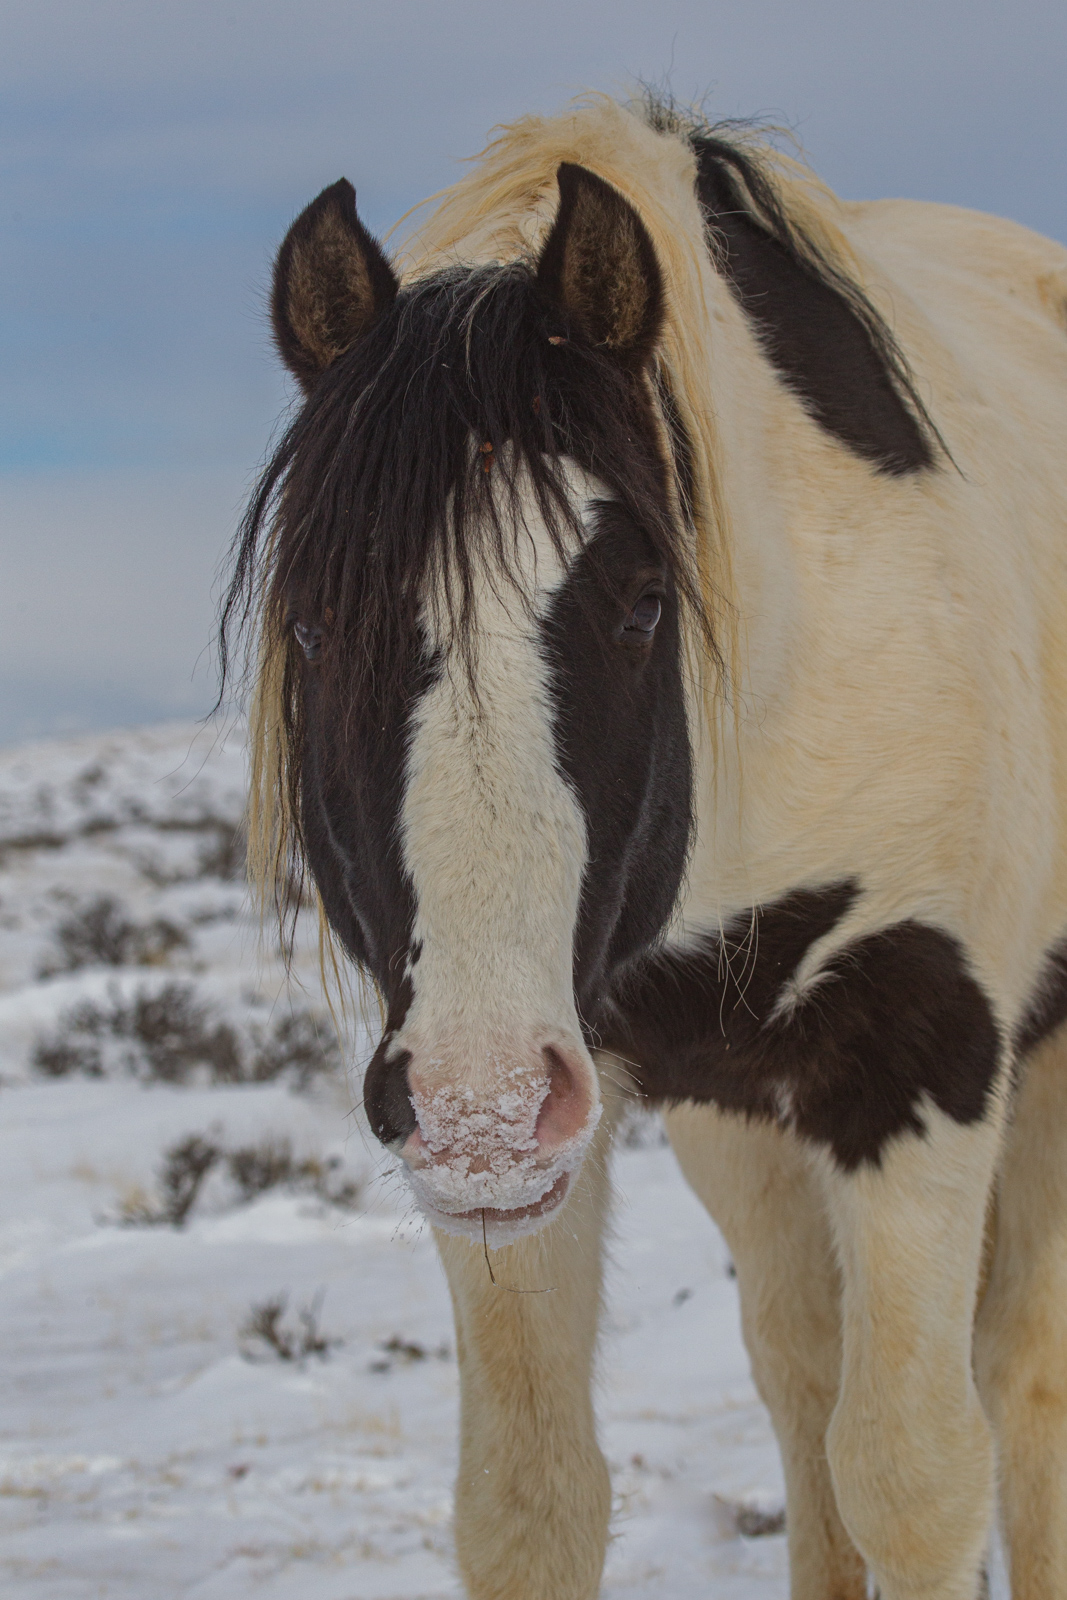 Wild Horses in Winter. Curious a Fine Art Limited Edition Prints by Jess Lee. Bring home the beauty Order yours Today.